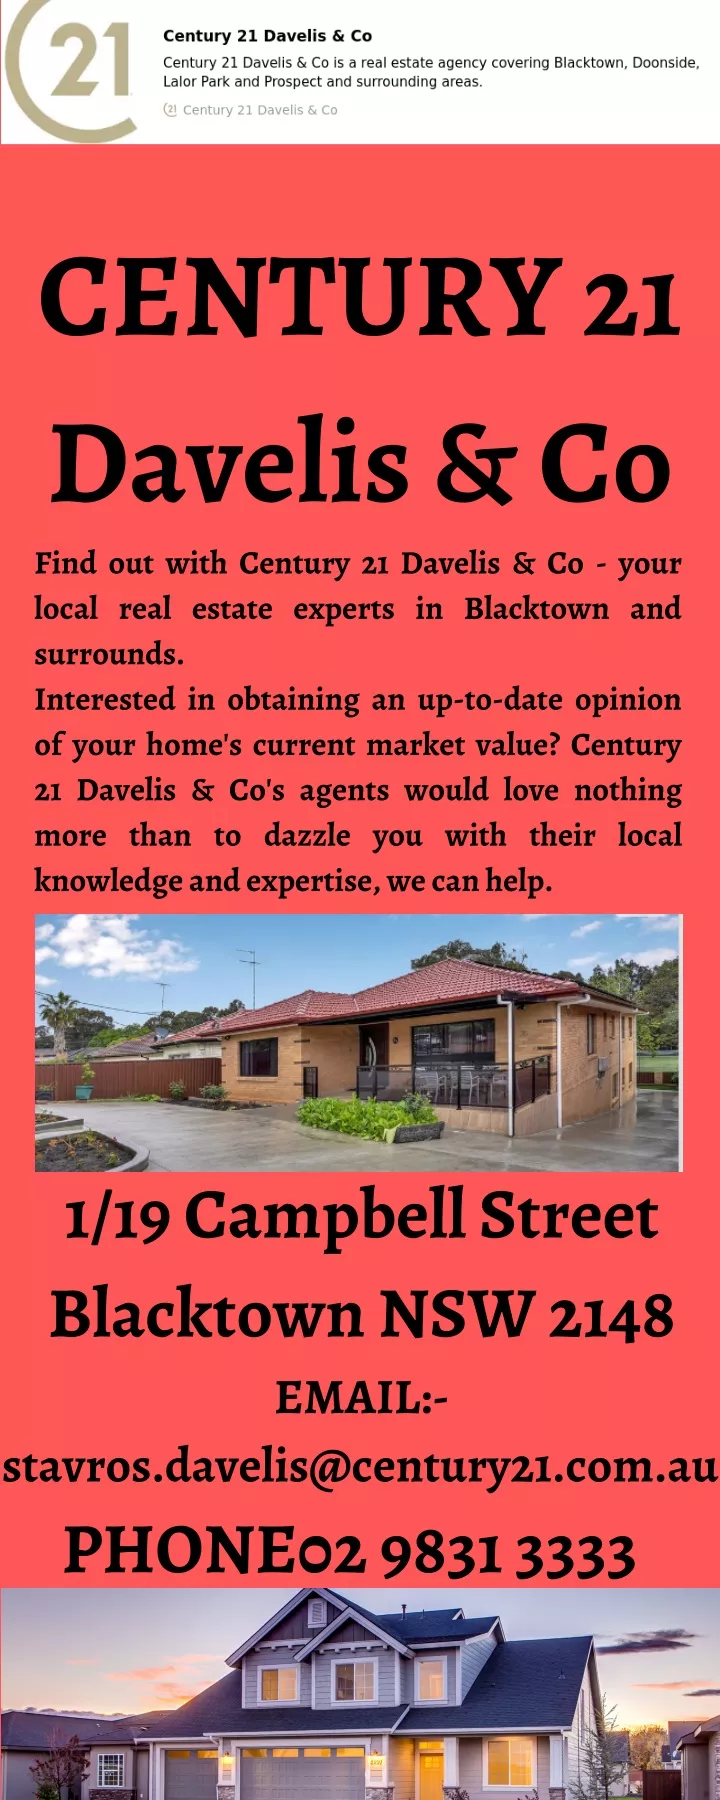 century 21 davelis co find out with century